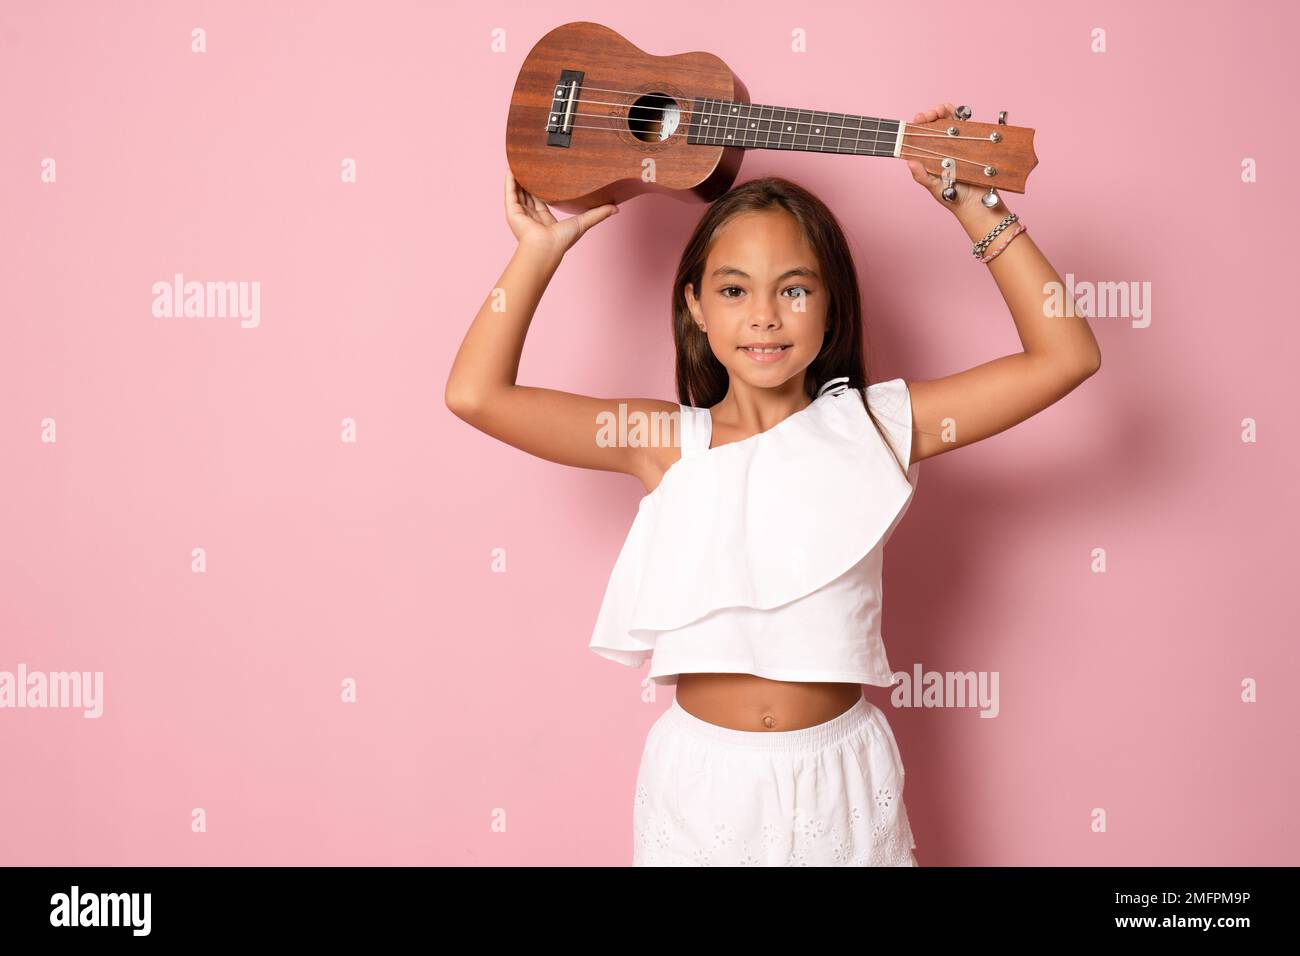 Cute little girl in summer clothing playing ukulele over pink background.  Happy vacation concept Stock Photo - Alamy